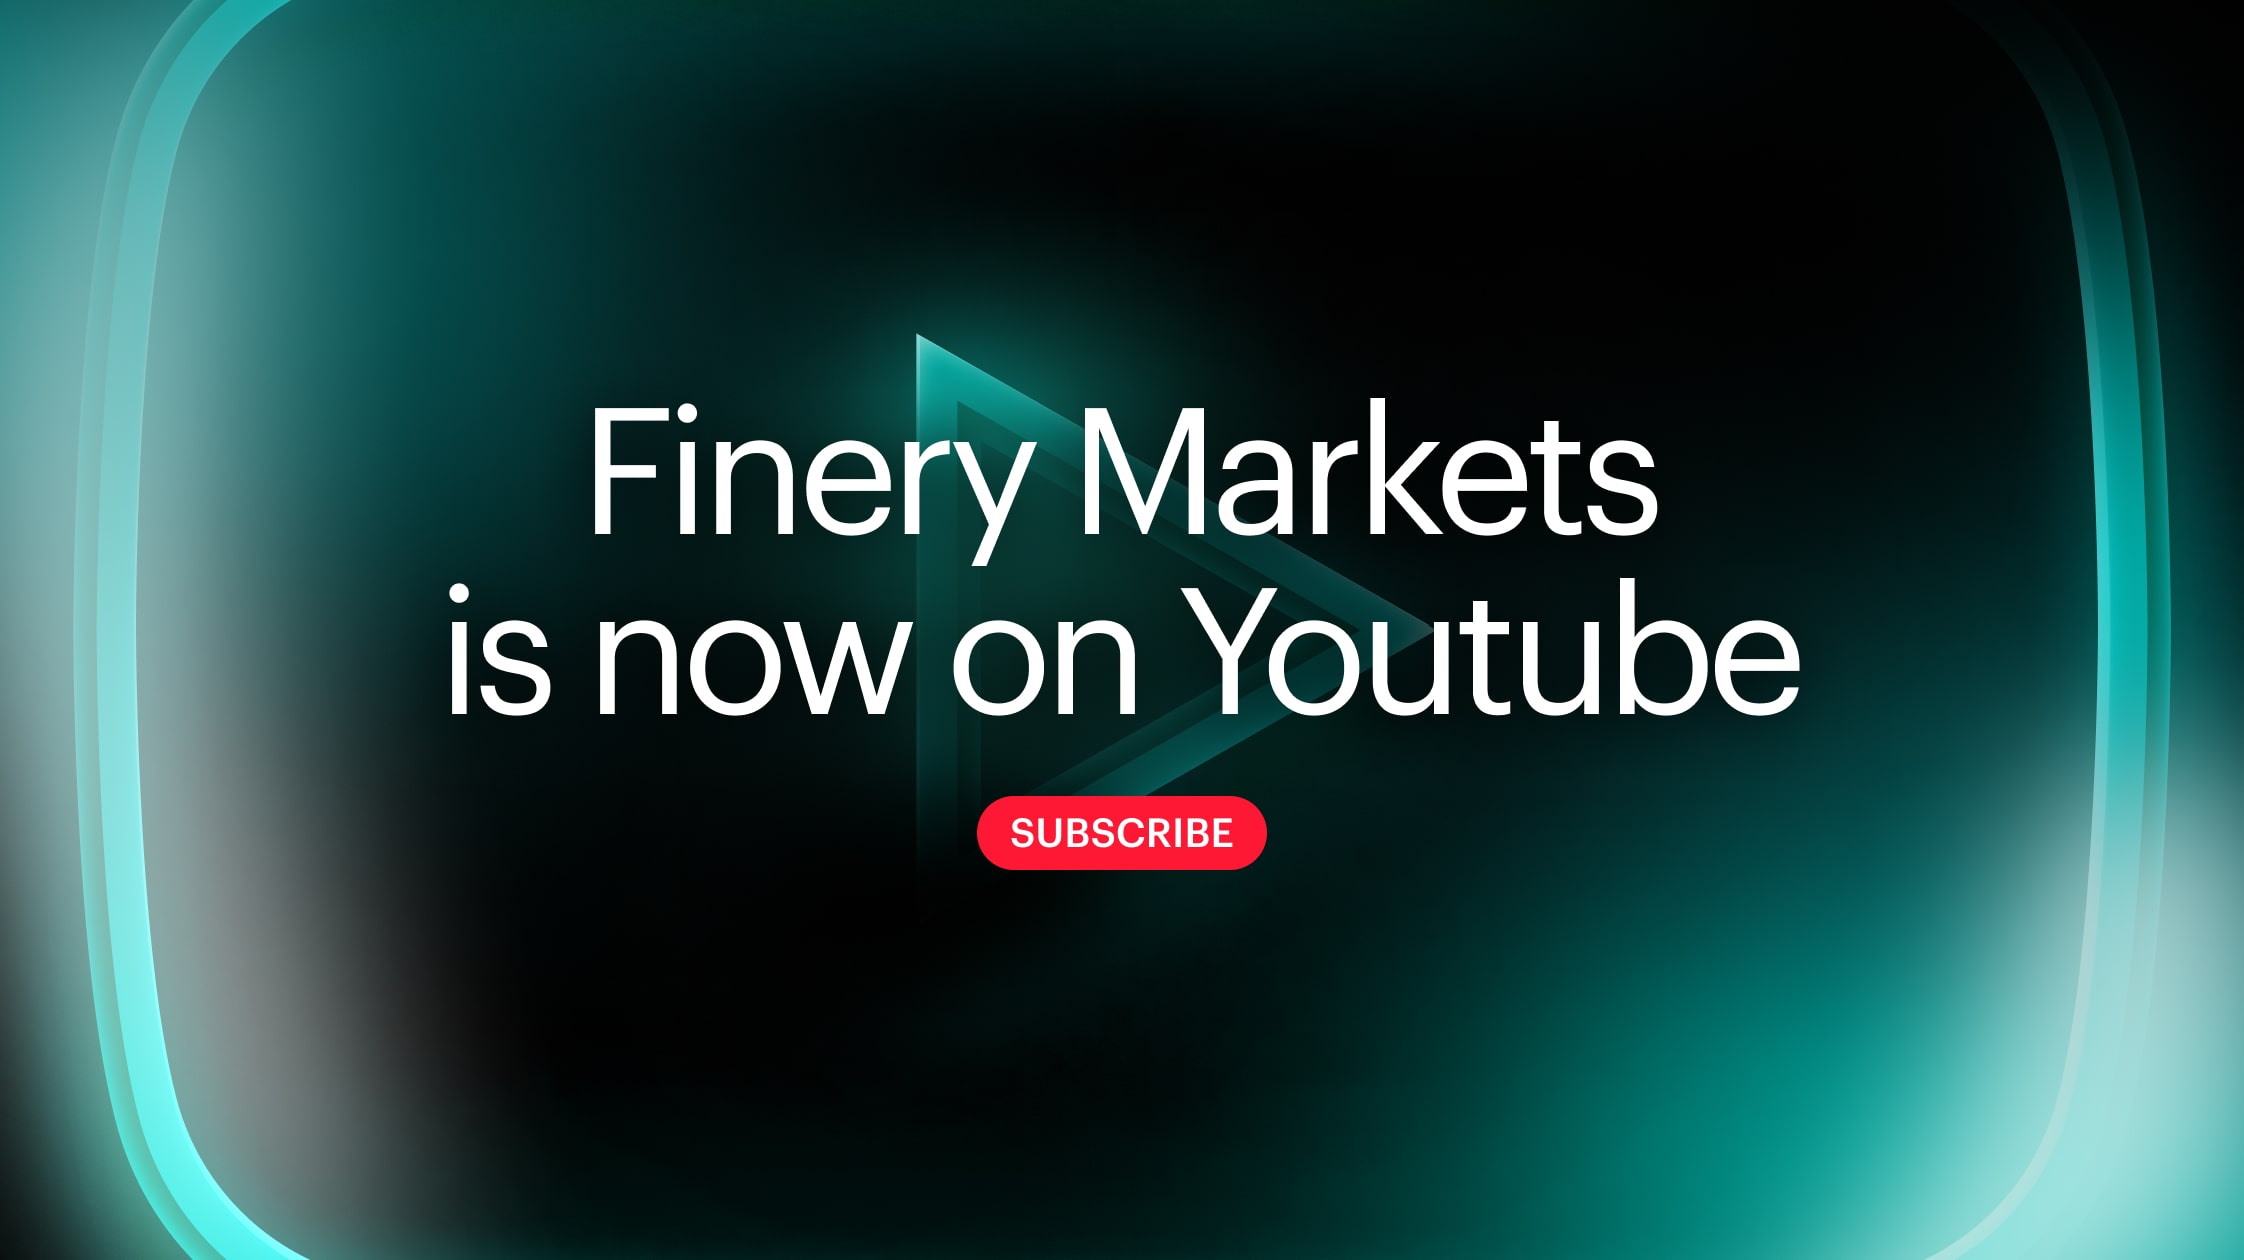 Finery Markets is now on YouTube 🎬